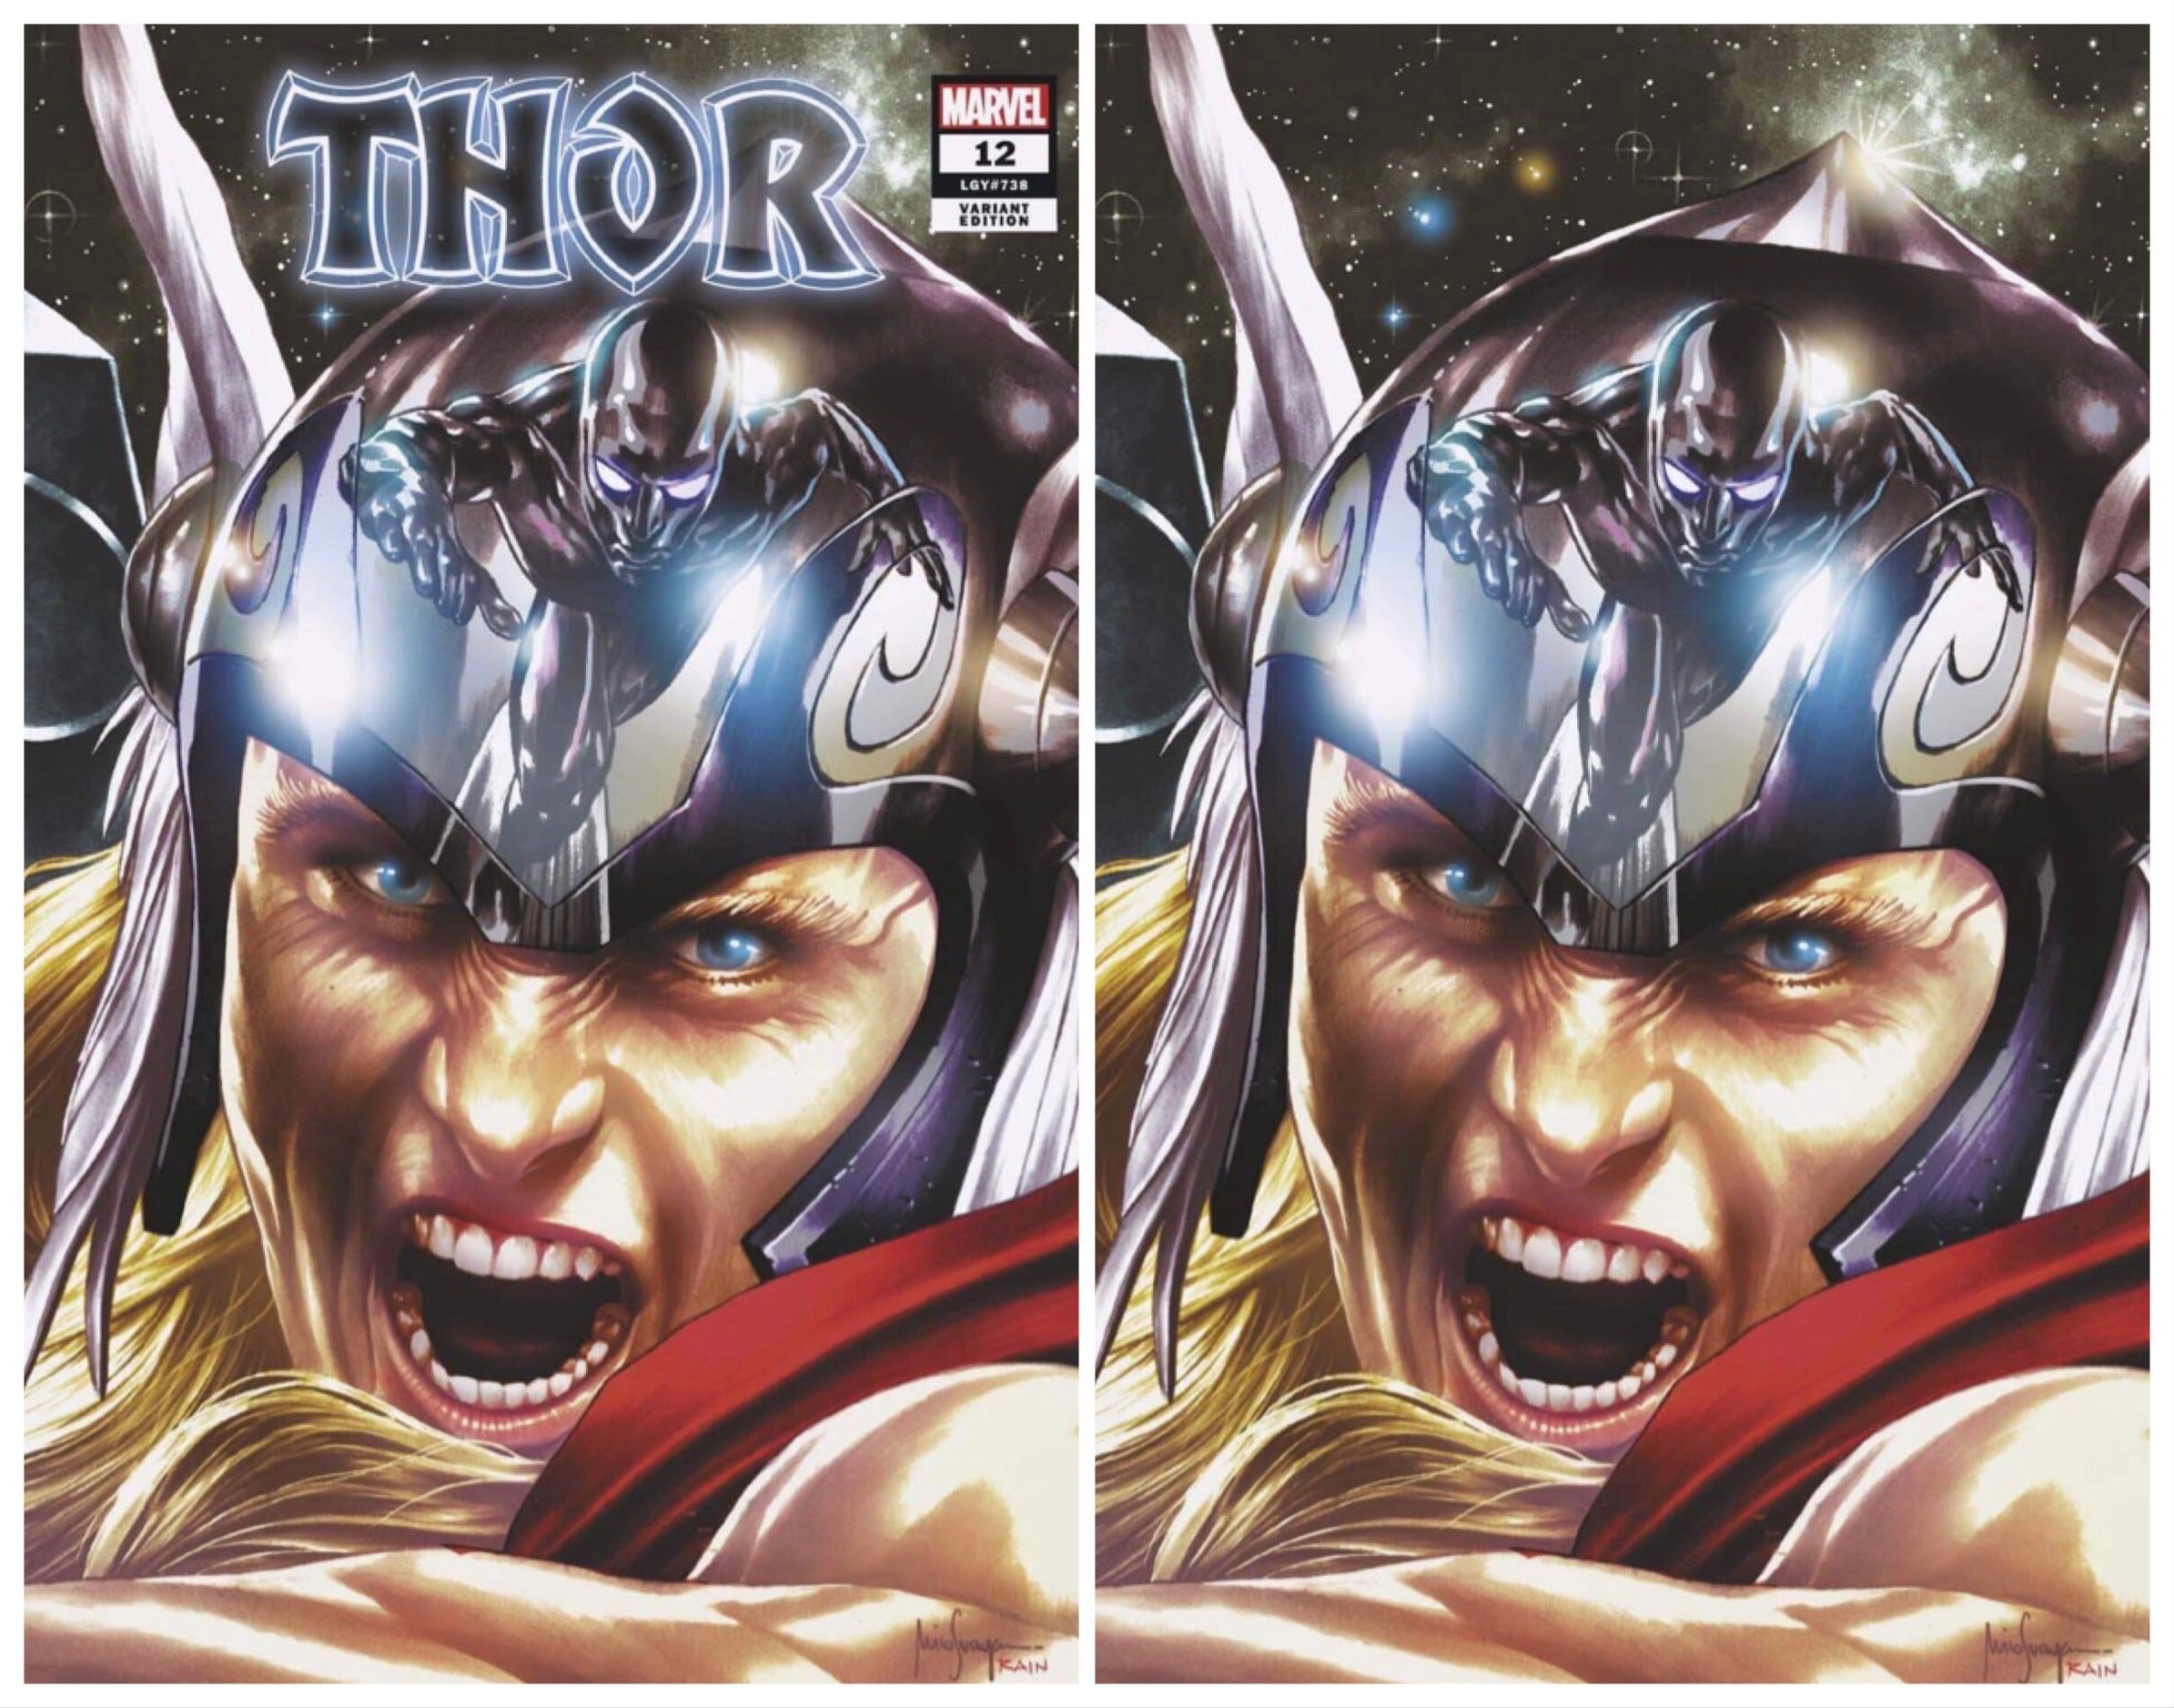 02/17/2021 THOR #12 MICO SUAYAN EXCLUSIVE VARIANT